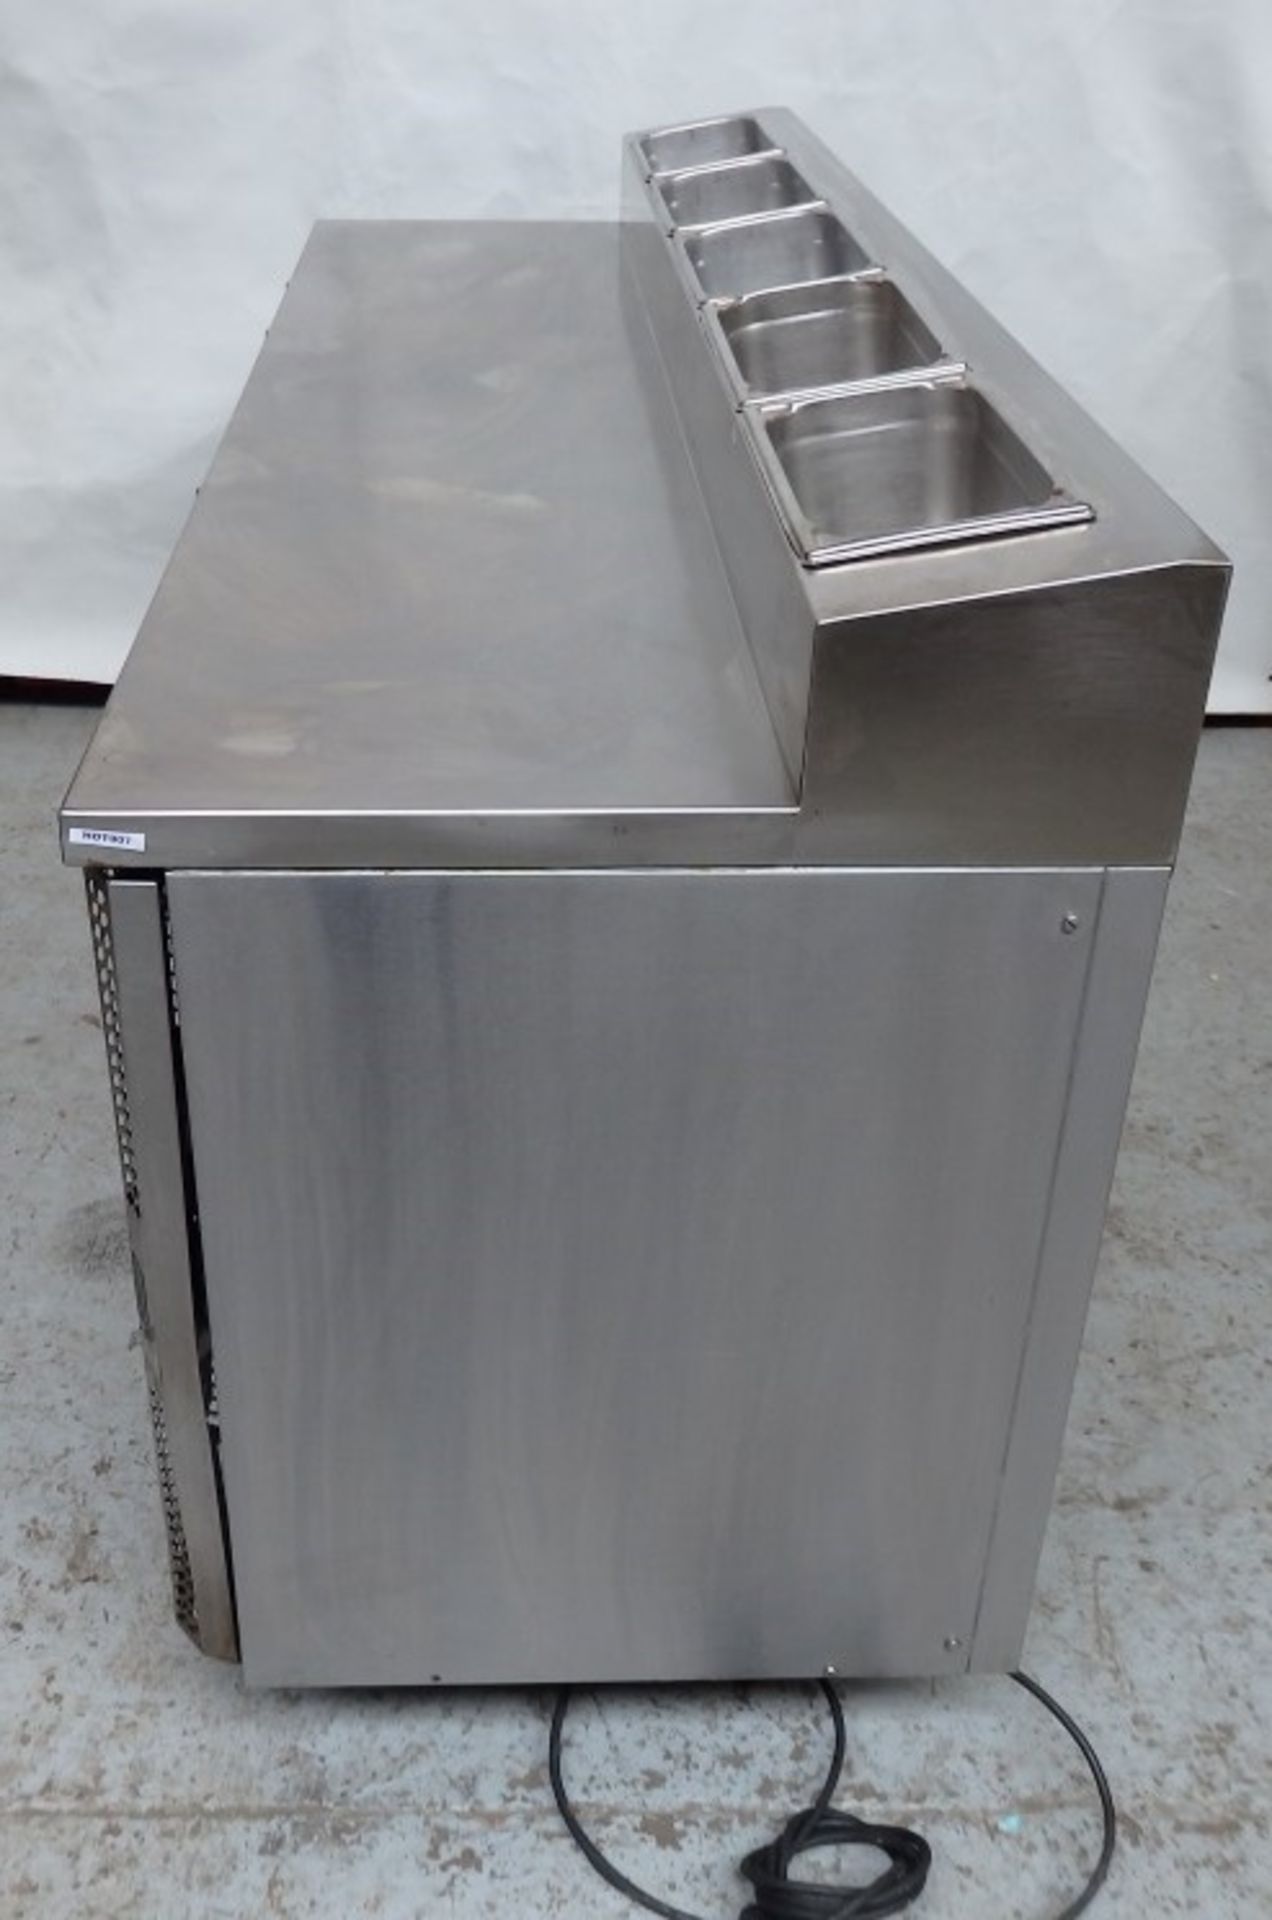 1 x "Precision" Commercial Refrigerator Counter With 3-Door Storage - Model: Gastronorm MCU-311 - - Image 8 of 12